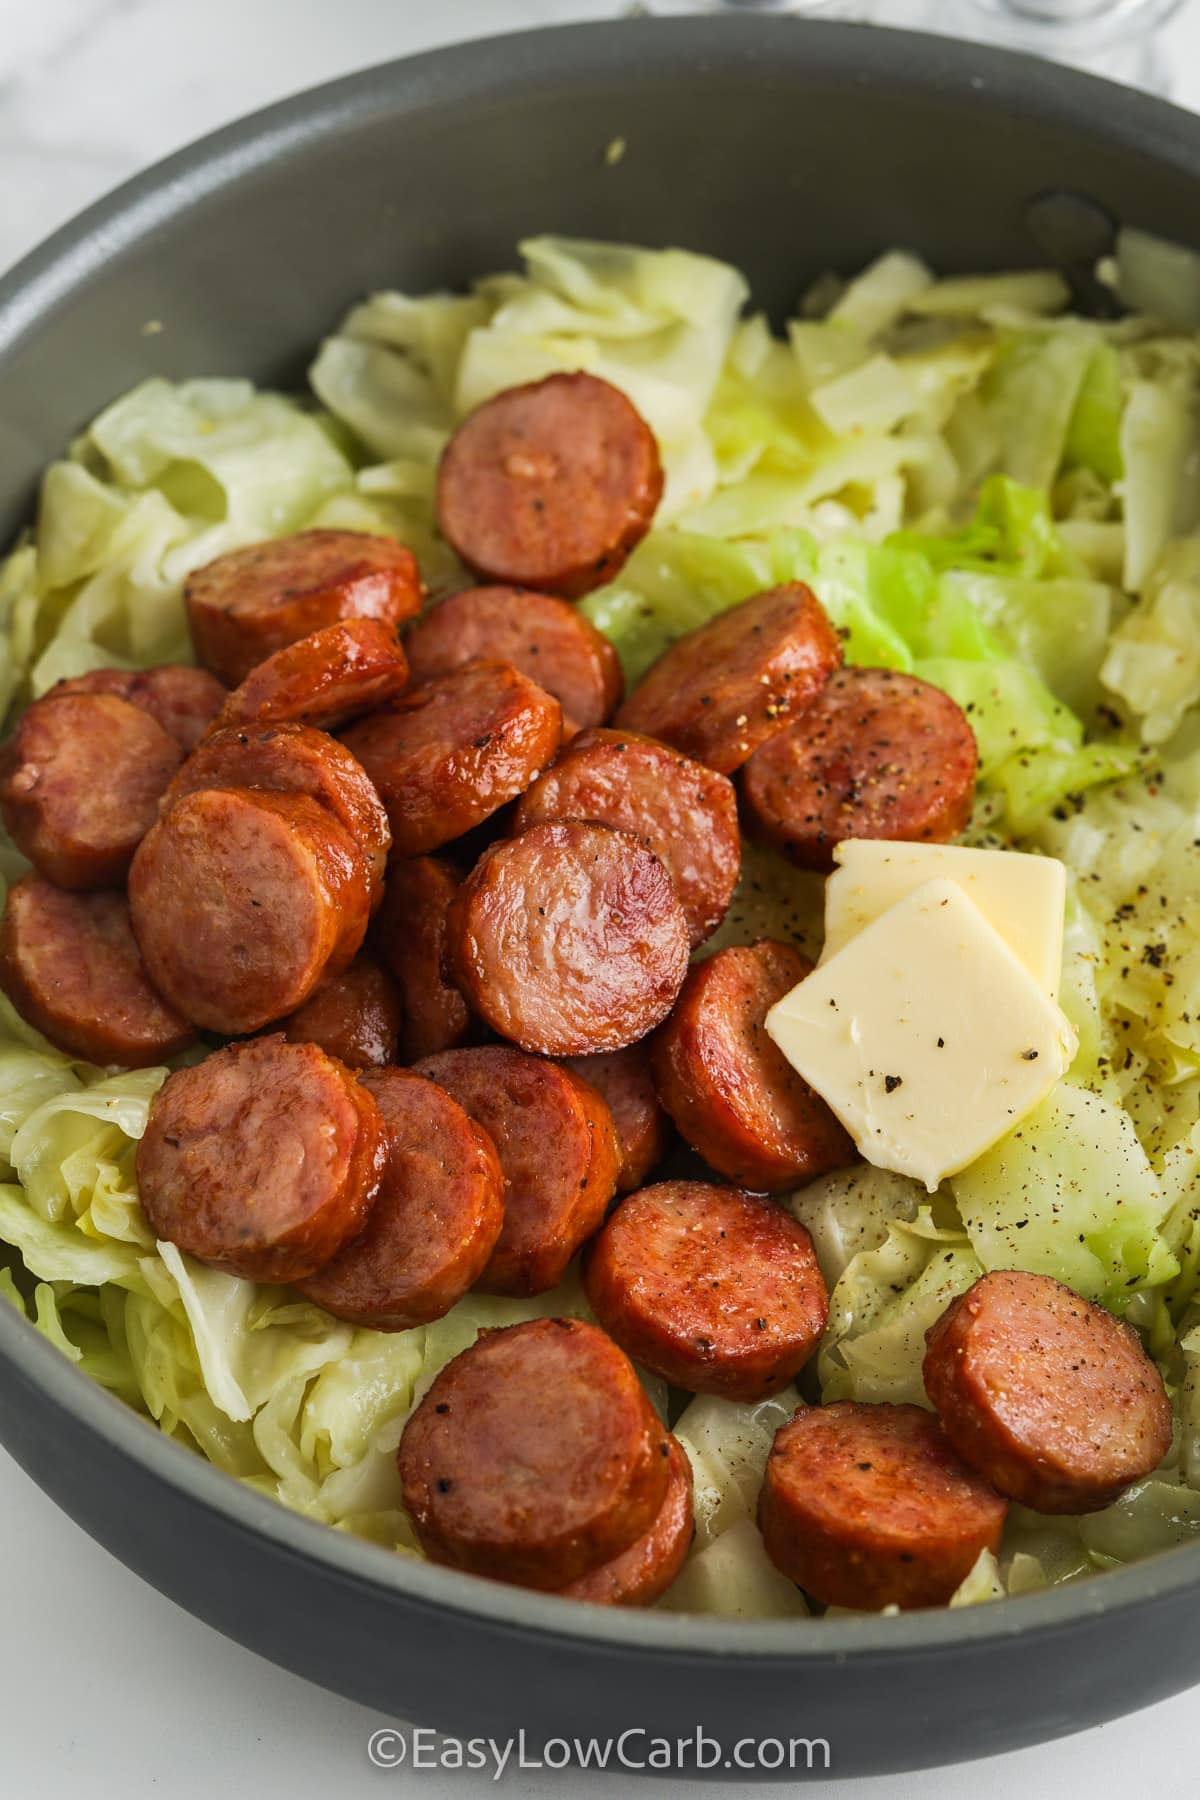 Fried Cabbage & Sausage in a skillet before being mixed.